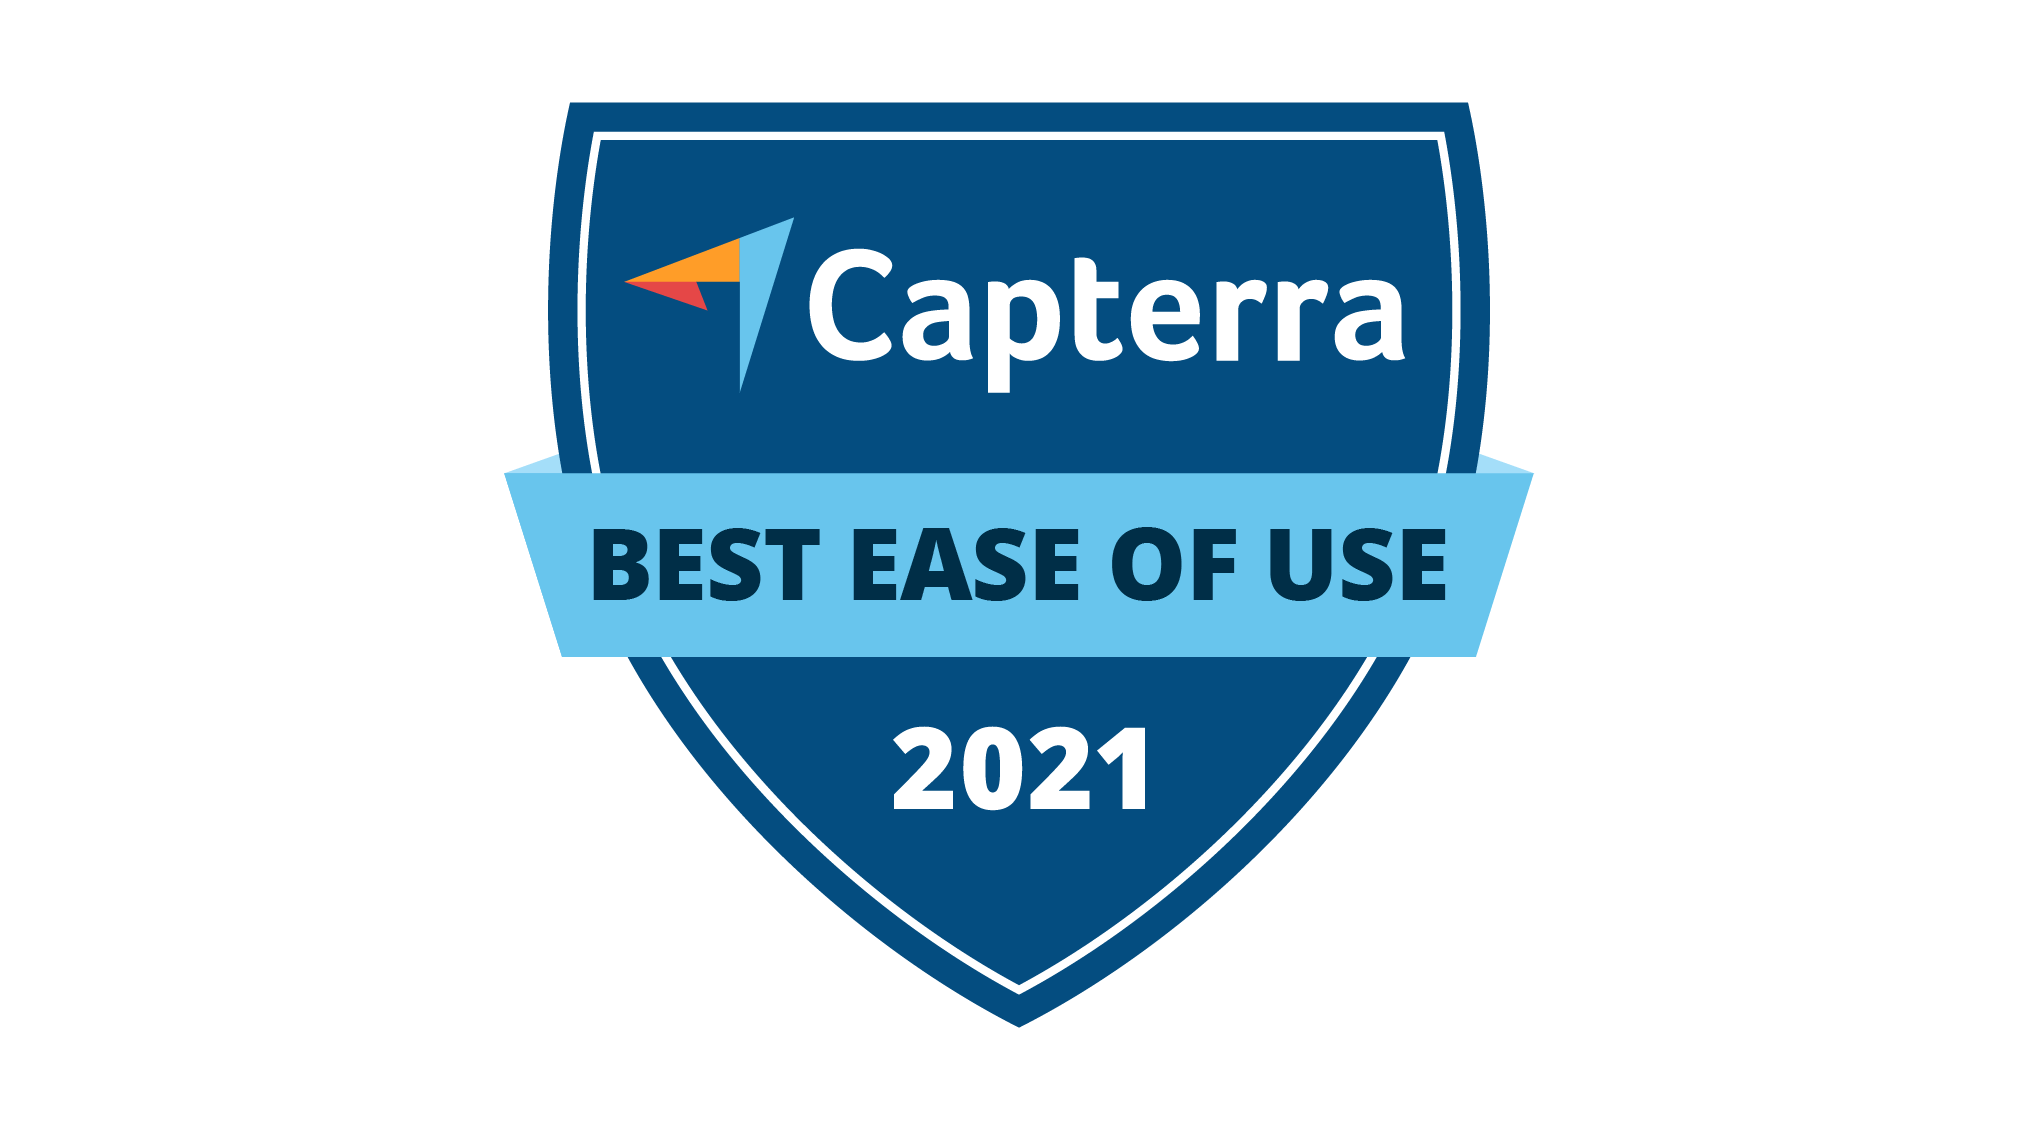 Capterra, a platform powered by Gartner, aggregates ratings in a specific software category once a year to recognize the highest-rated products by users. Based on verified reviews from real users, remote desktop software ISL Online has been awarded the best ease of use badge for several years in a row.